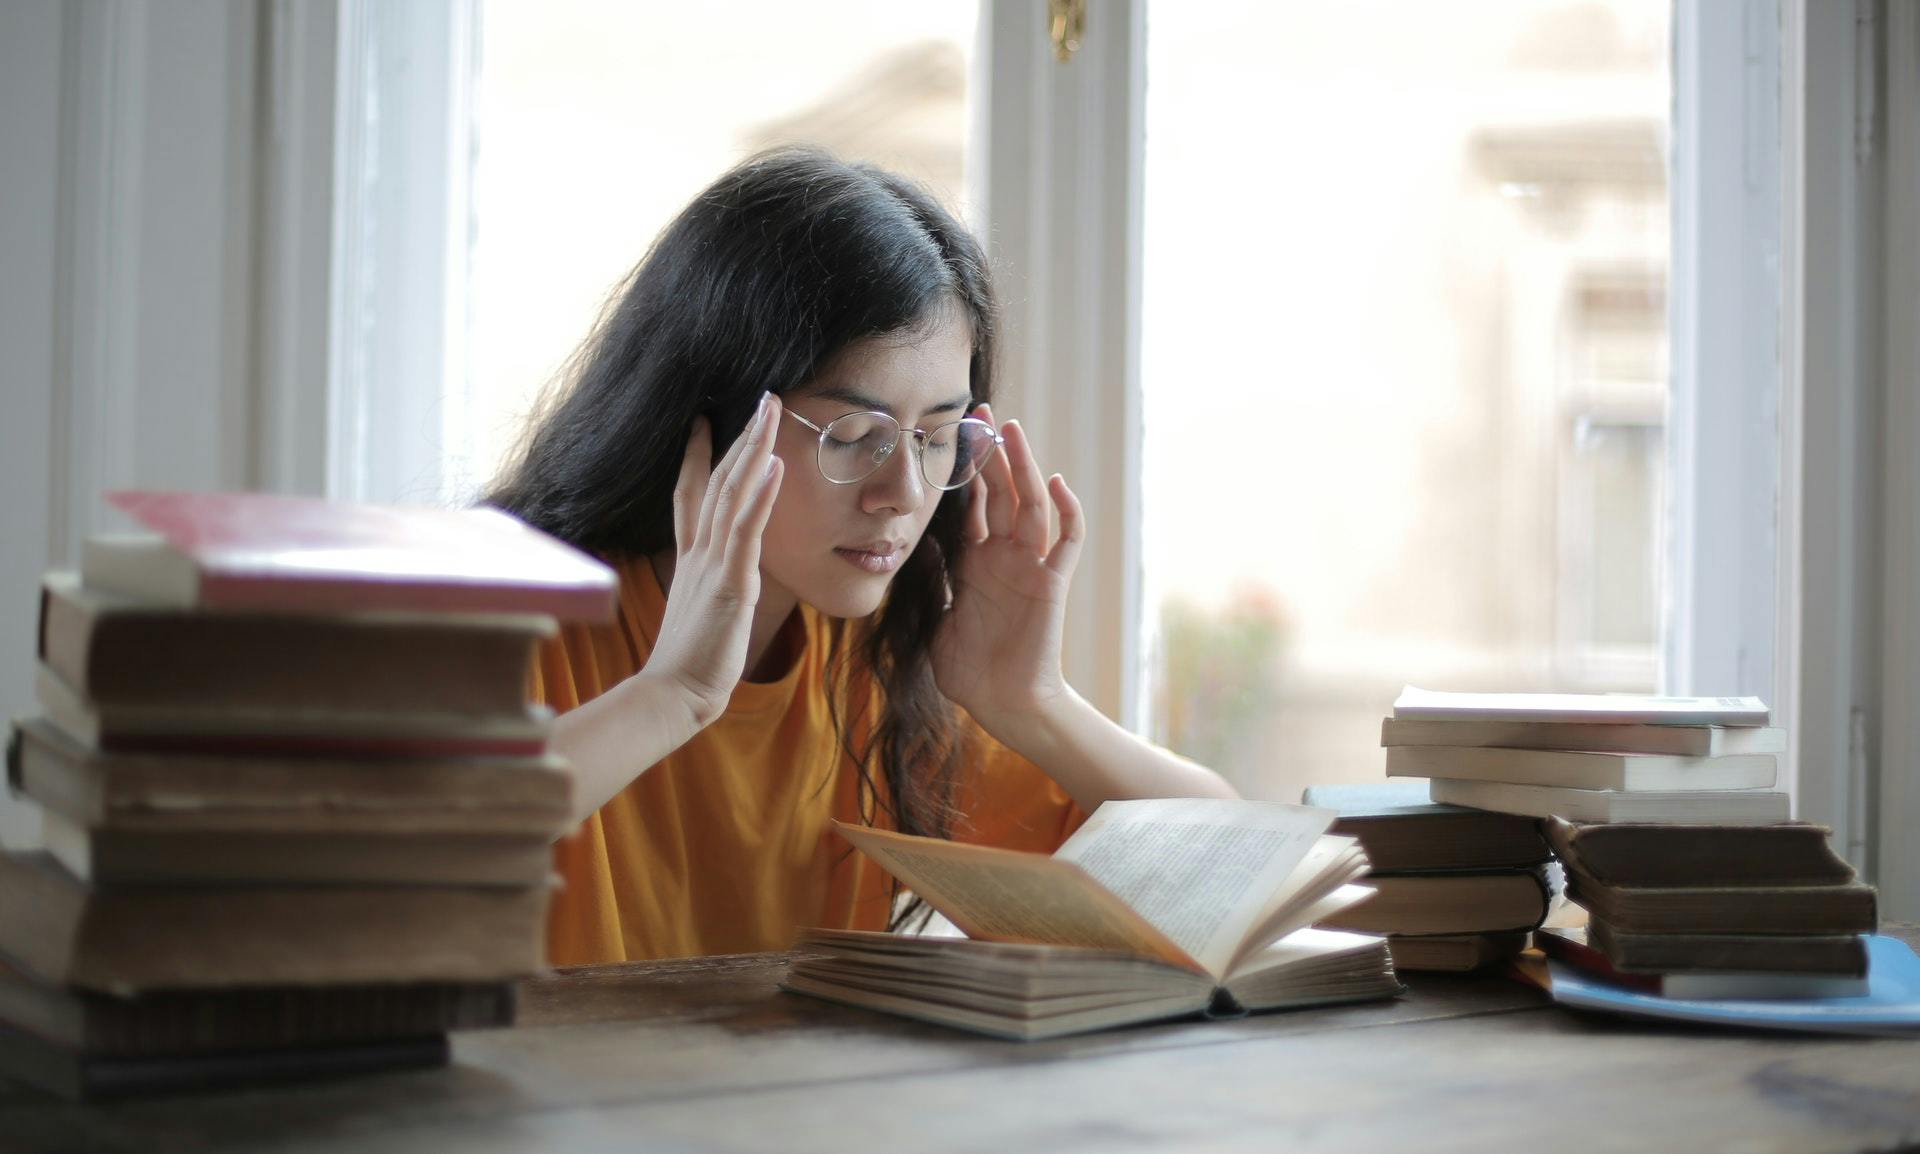 A high school student sits next to several piles of books and touches her temples as she struggles with rote memorization.